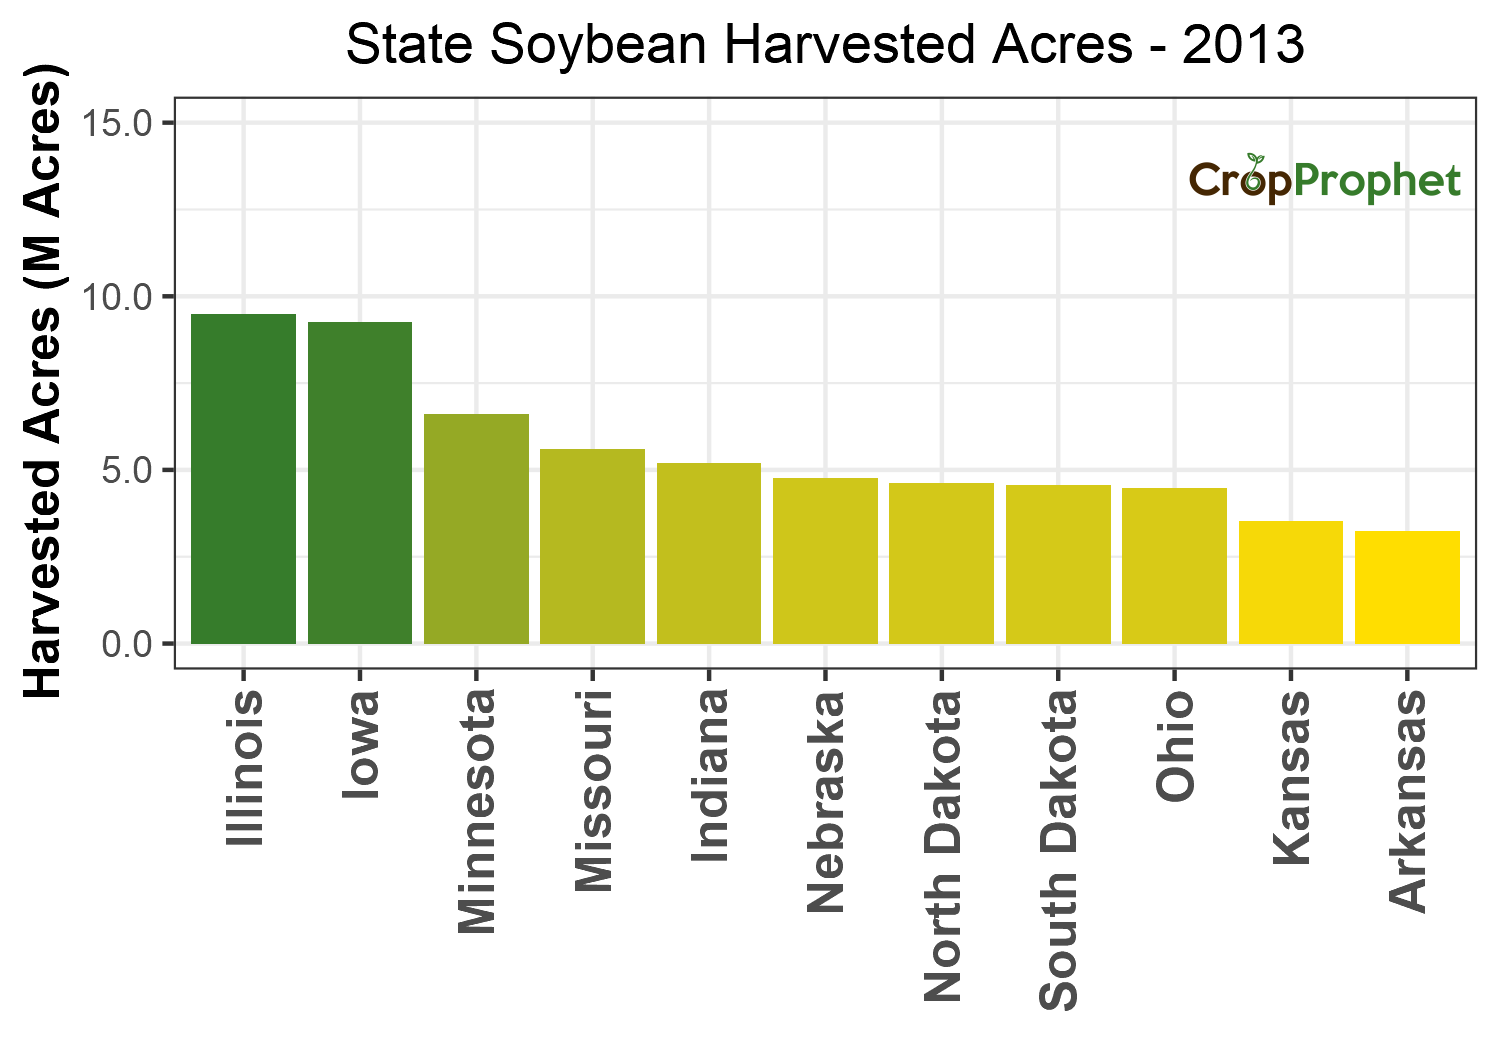 Soybean Harvested Acres by State - 2013 Rankings